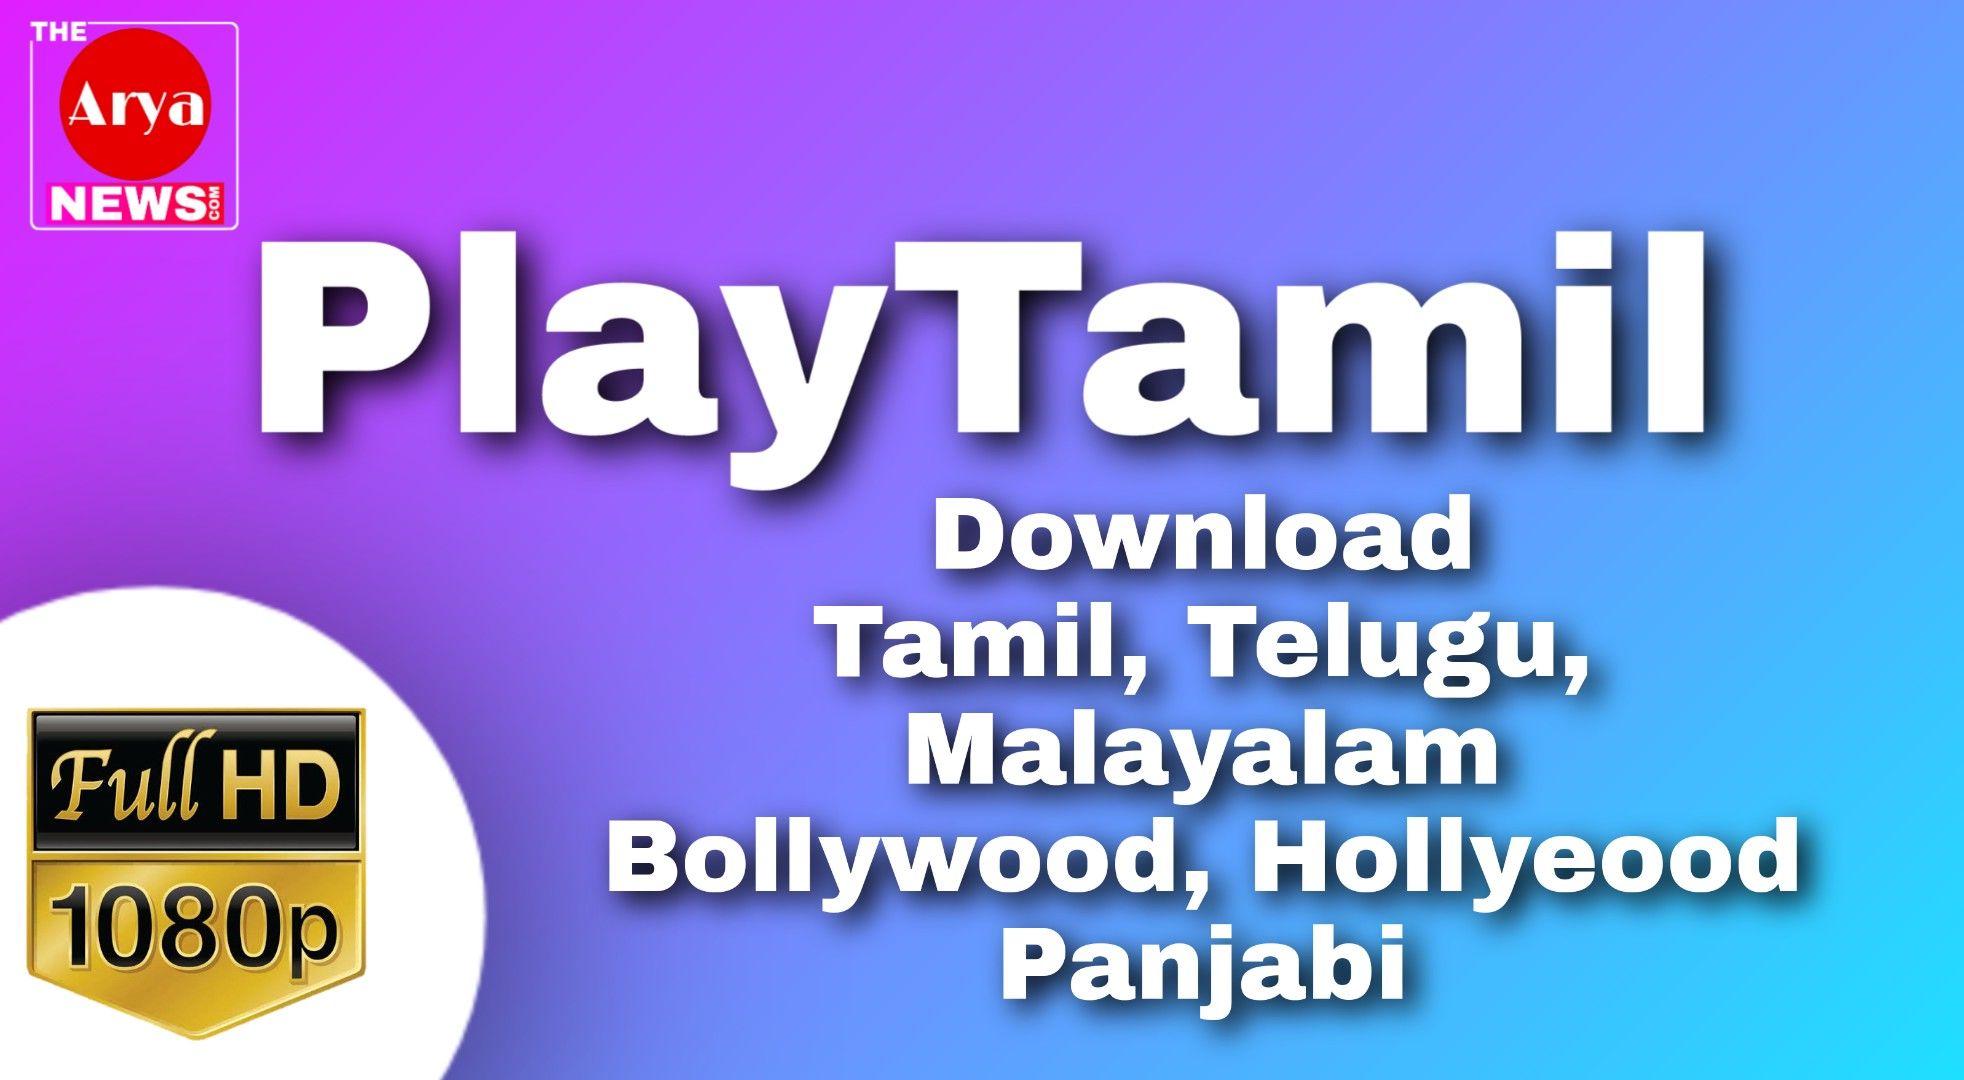 PlayTamil (2020) » Download Tamil Movies HD For Free 1080p